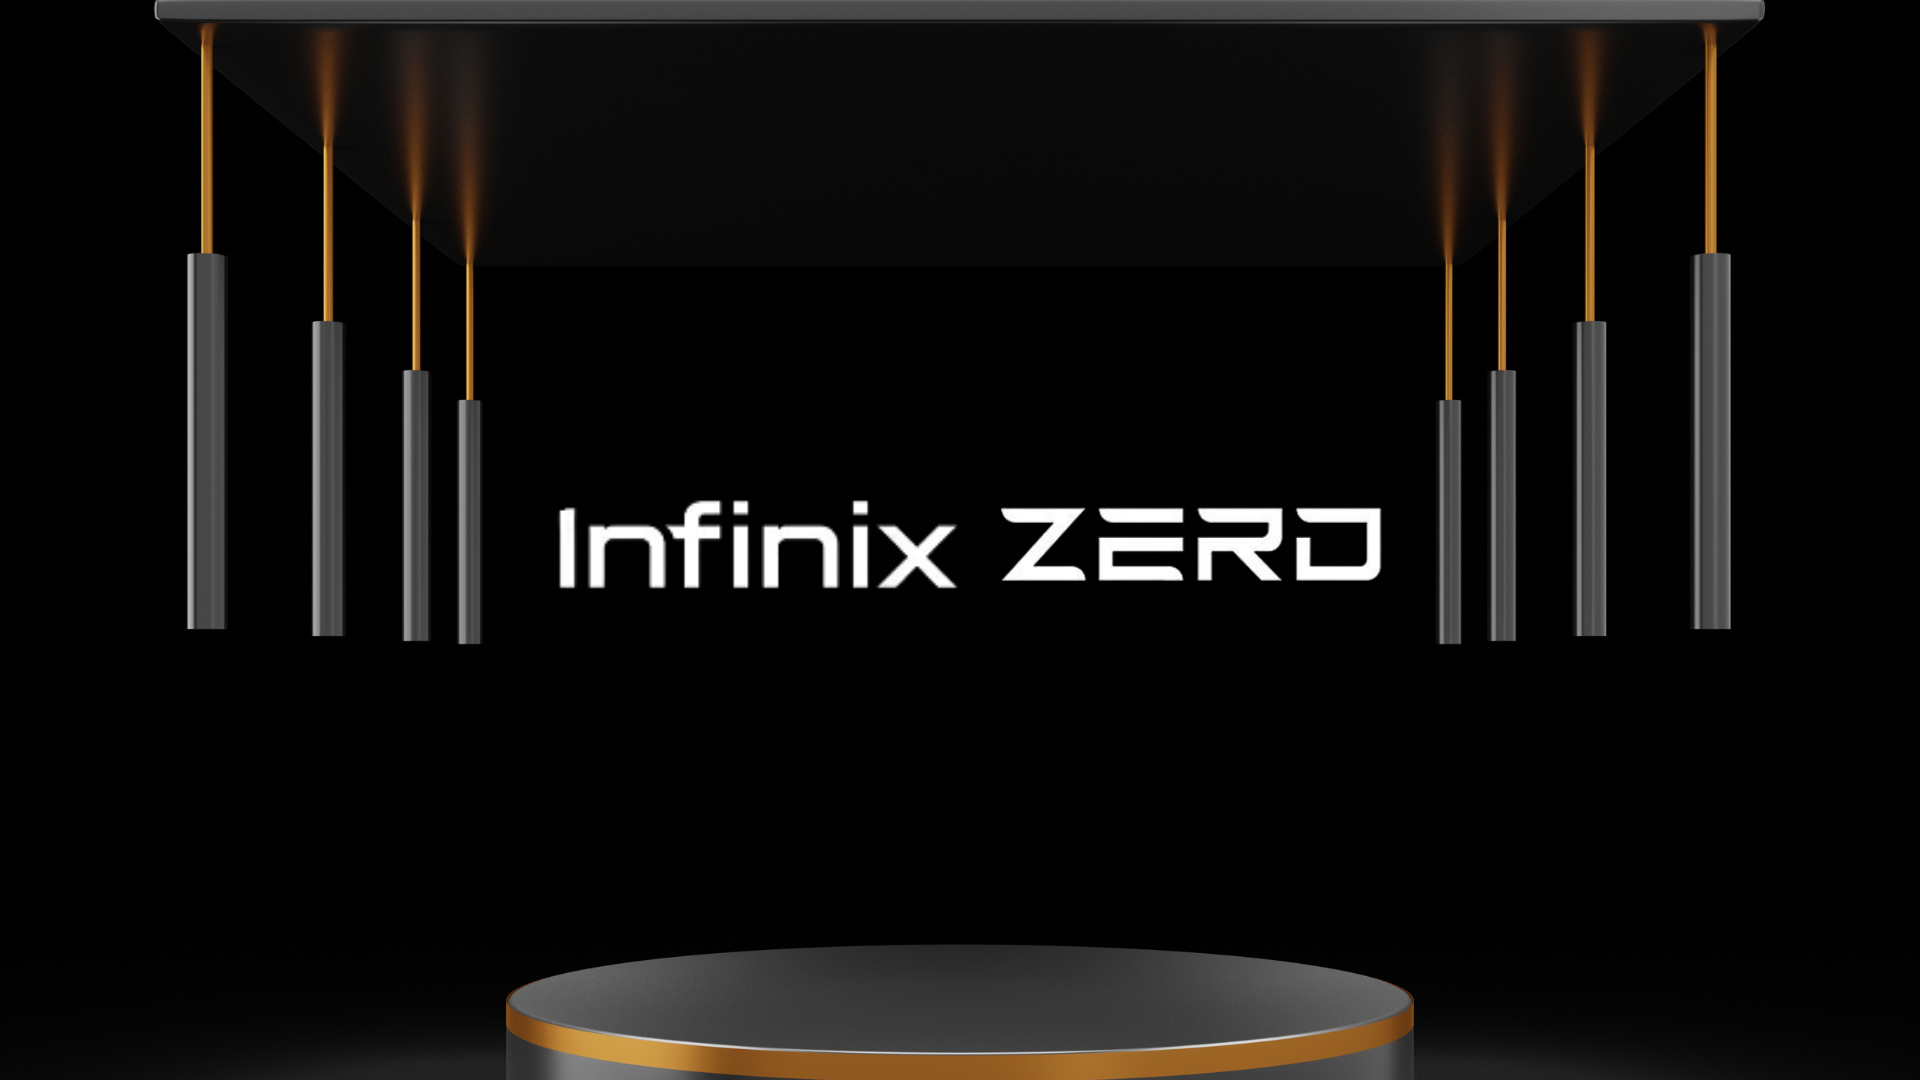 With Zero, Infinix leap jumps into the league of experiential brands